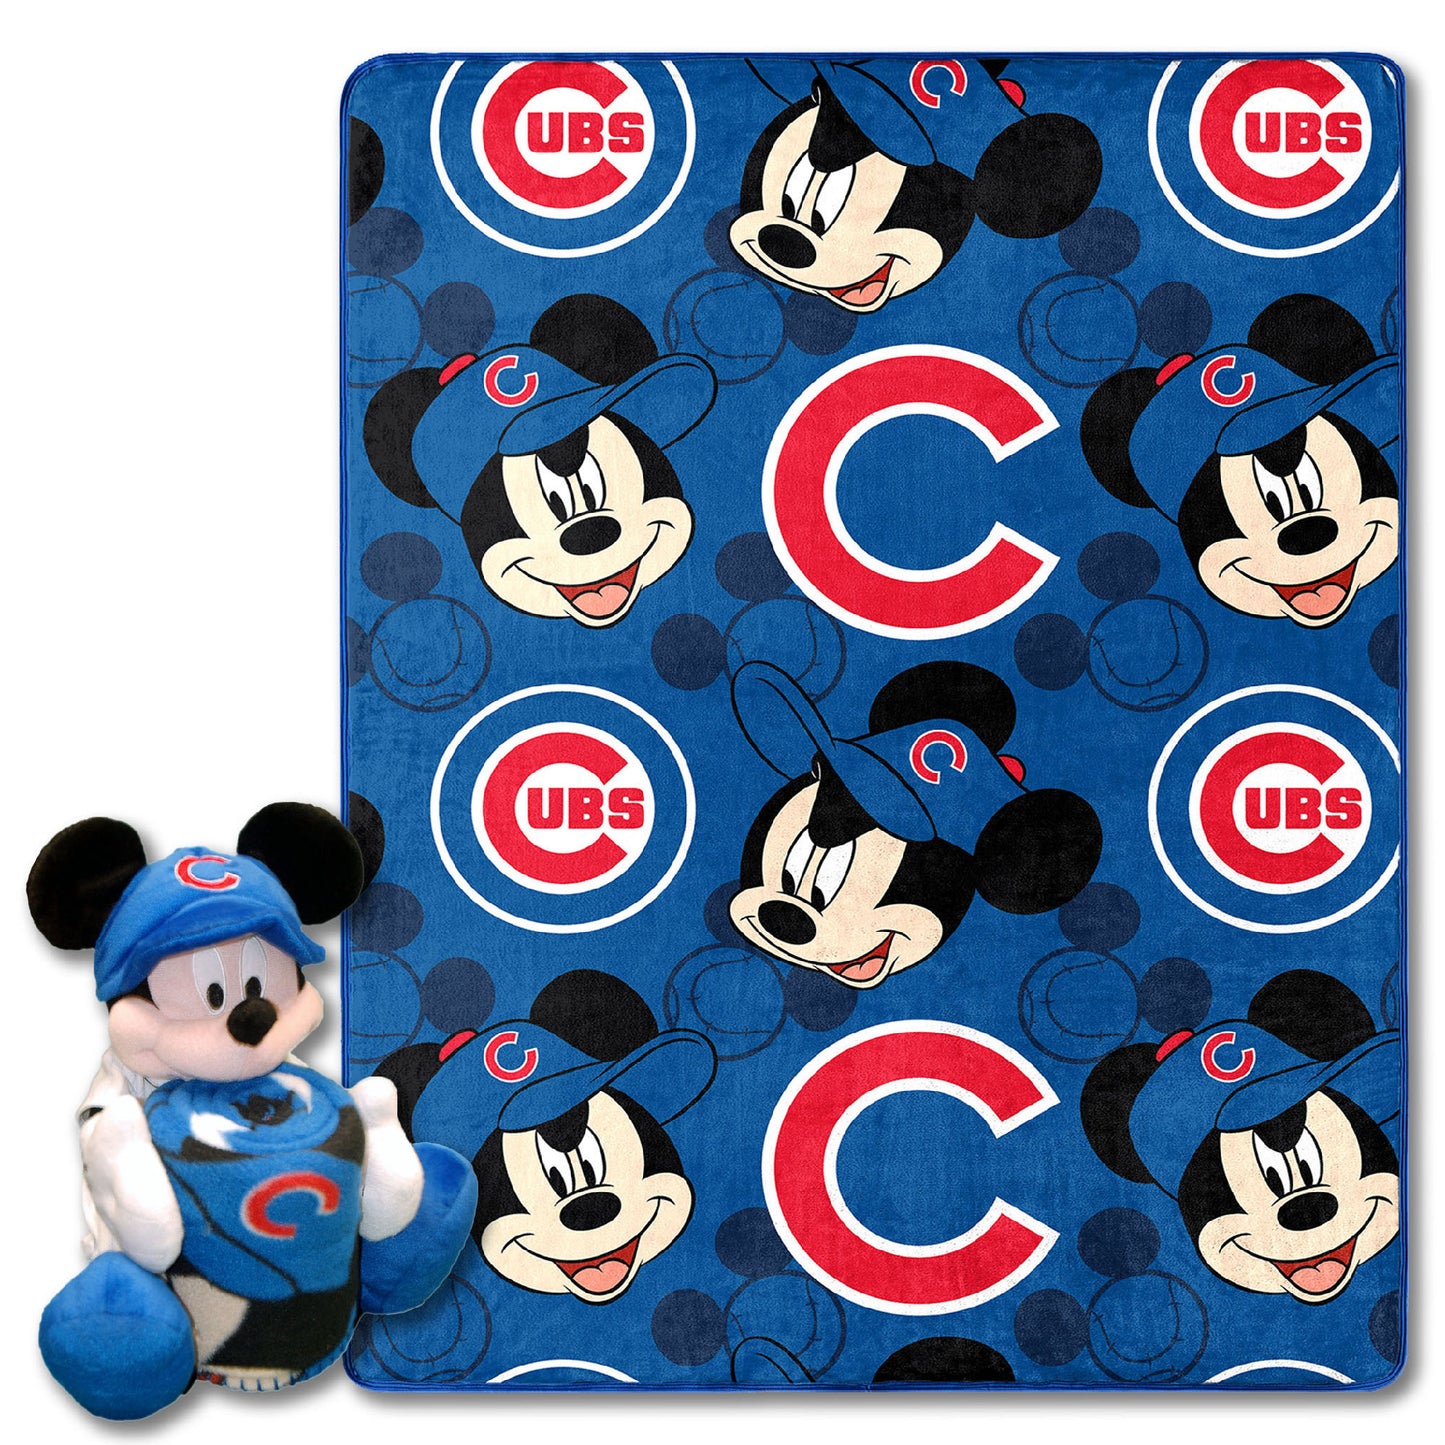 Cubs OFFICIAL MLB & Disney's Mickey Mouse Character Hugger Pillow & Silk Touch Throw Set;  40" x 50"